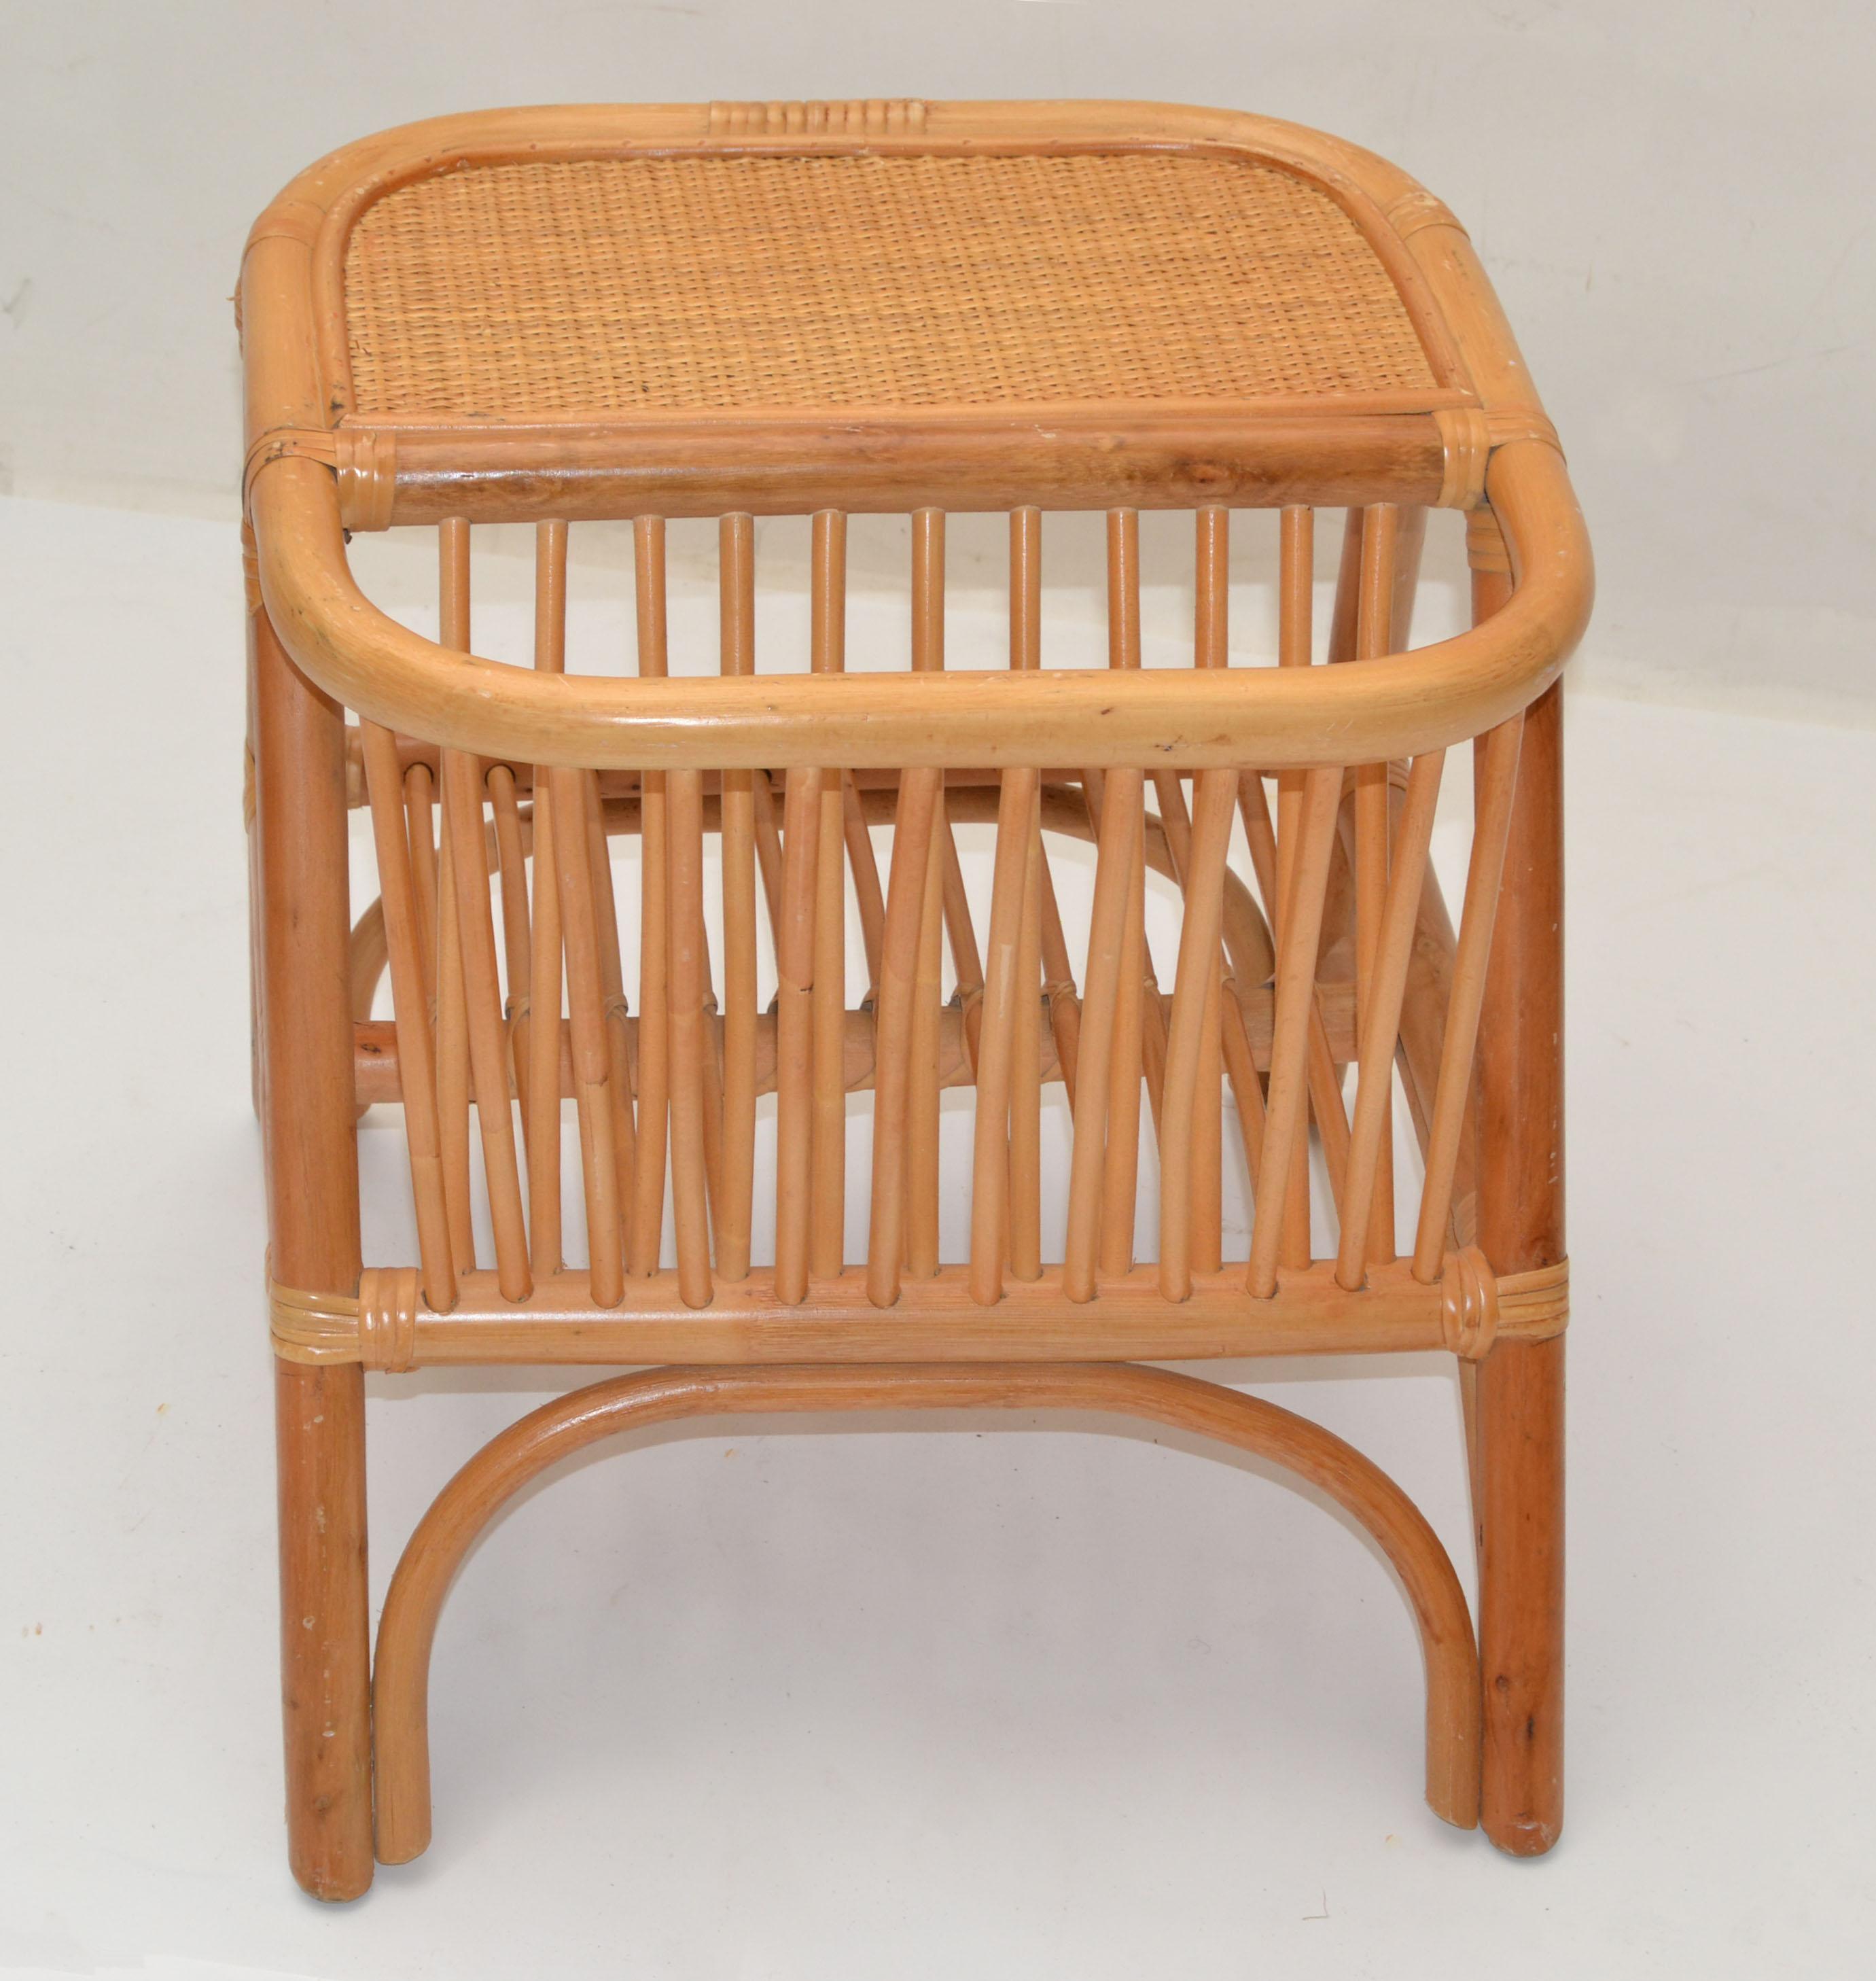 Hand-Crafted Bohemian Mid-Century Modern Handcrafted Bamboo & Cane Magazine Rack Side Table For Sale